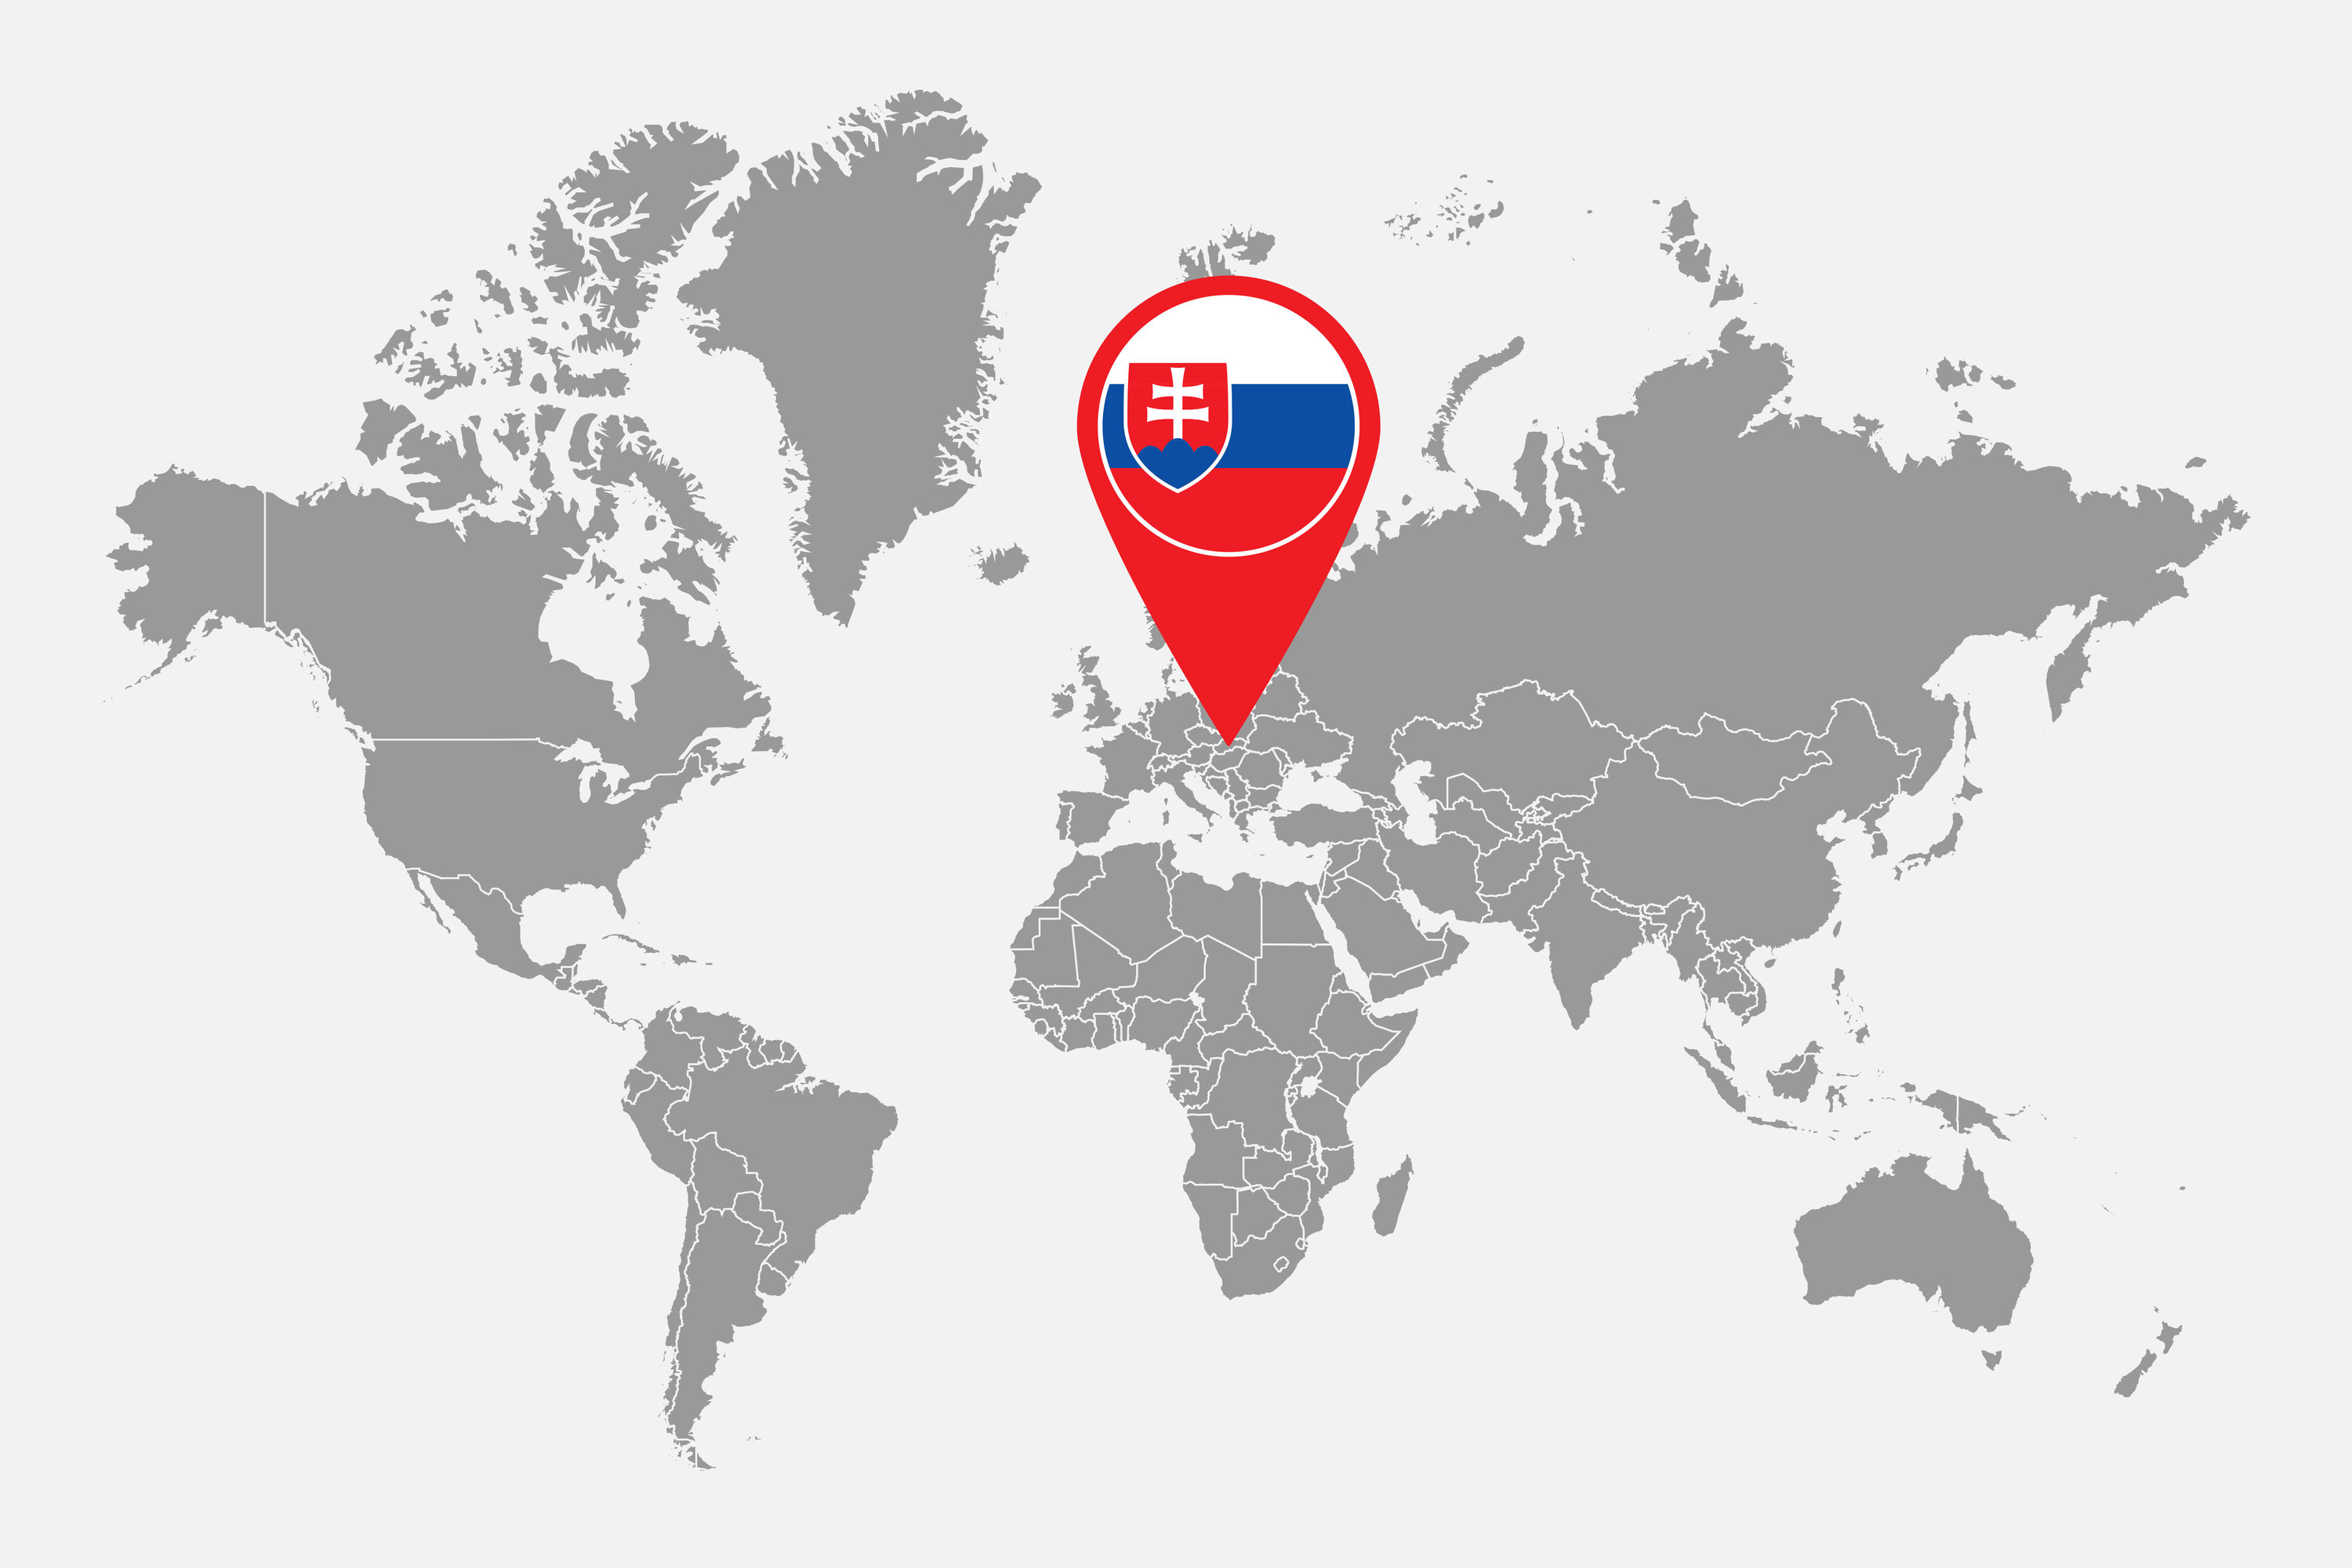 A world map with Slovakia indicated